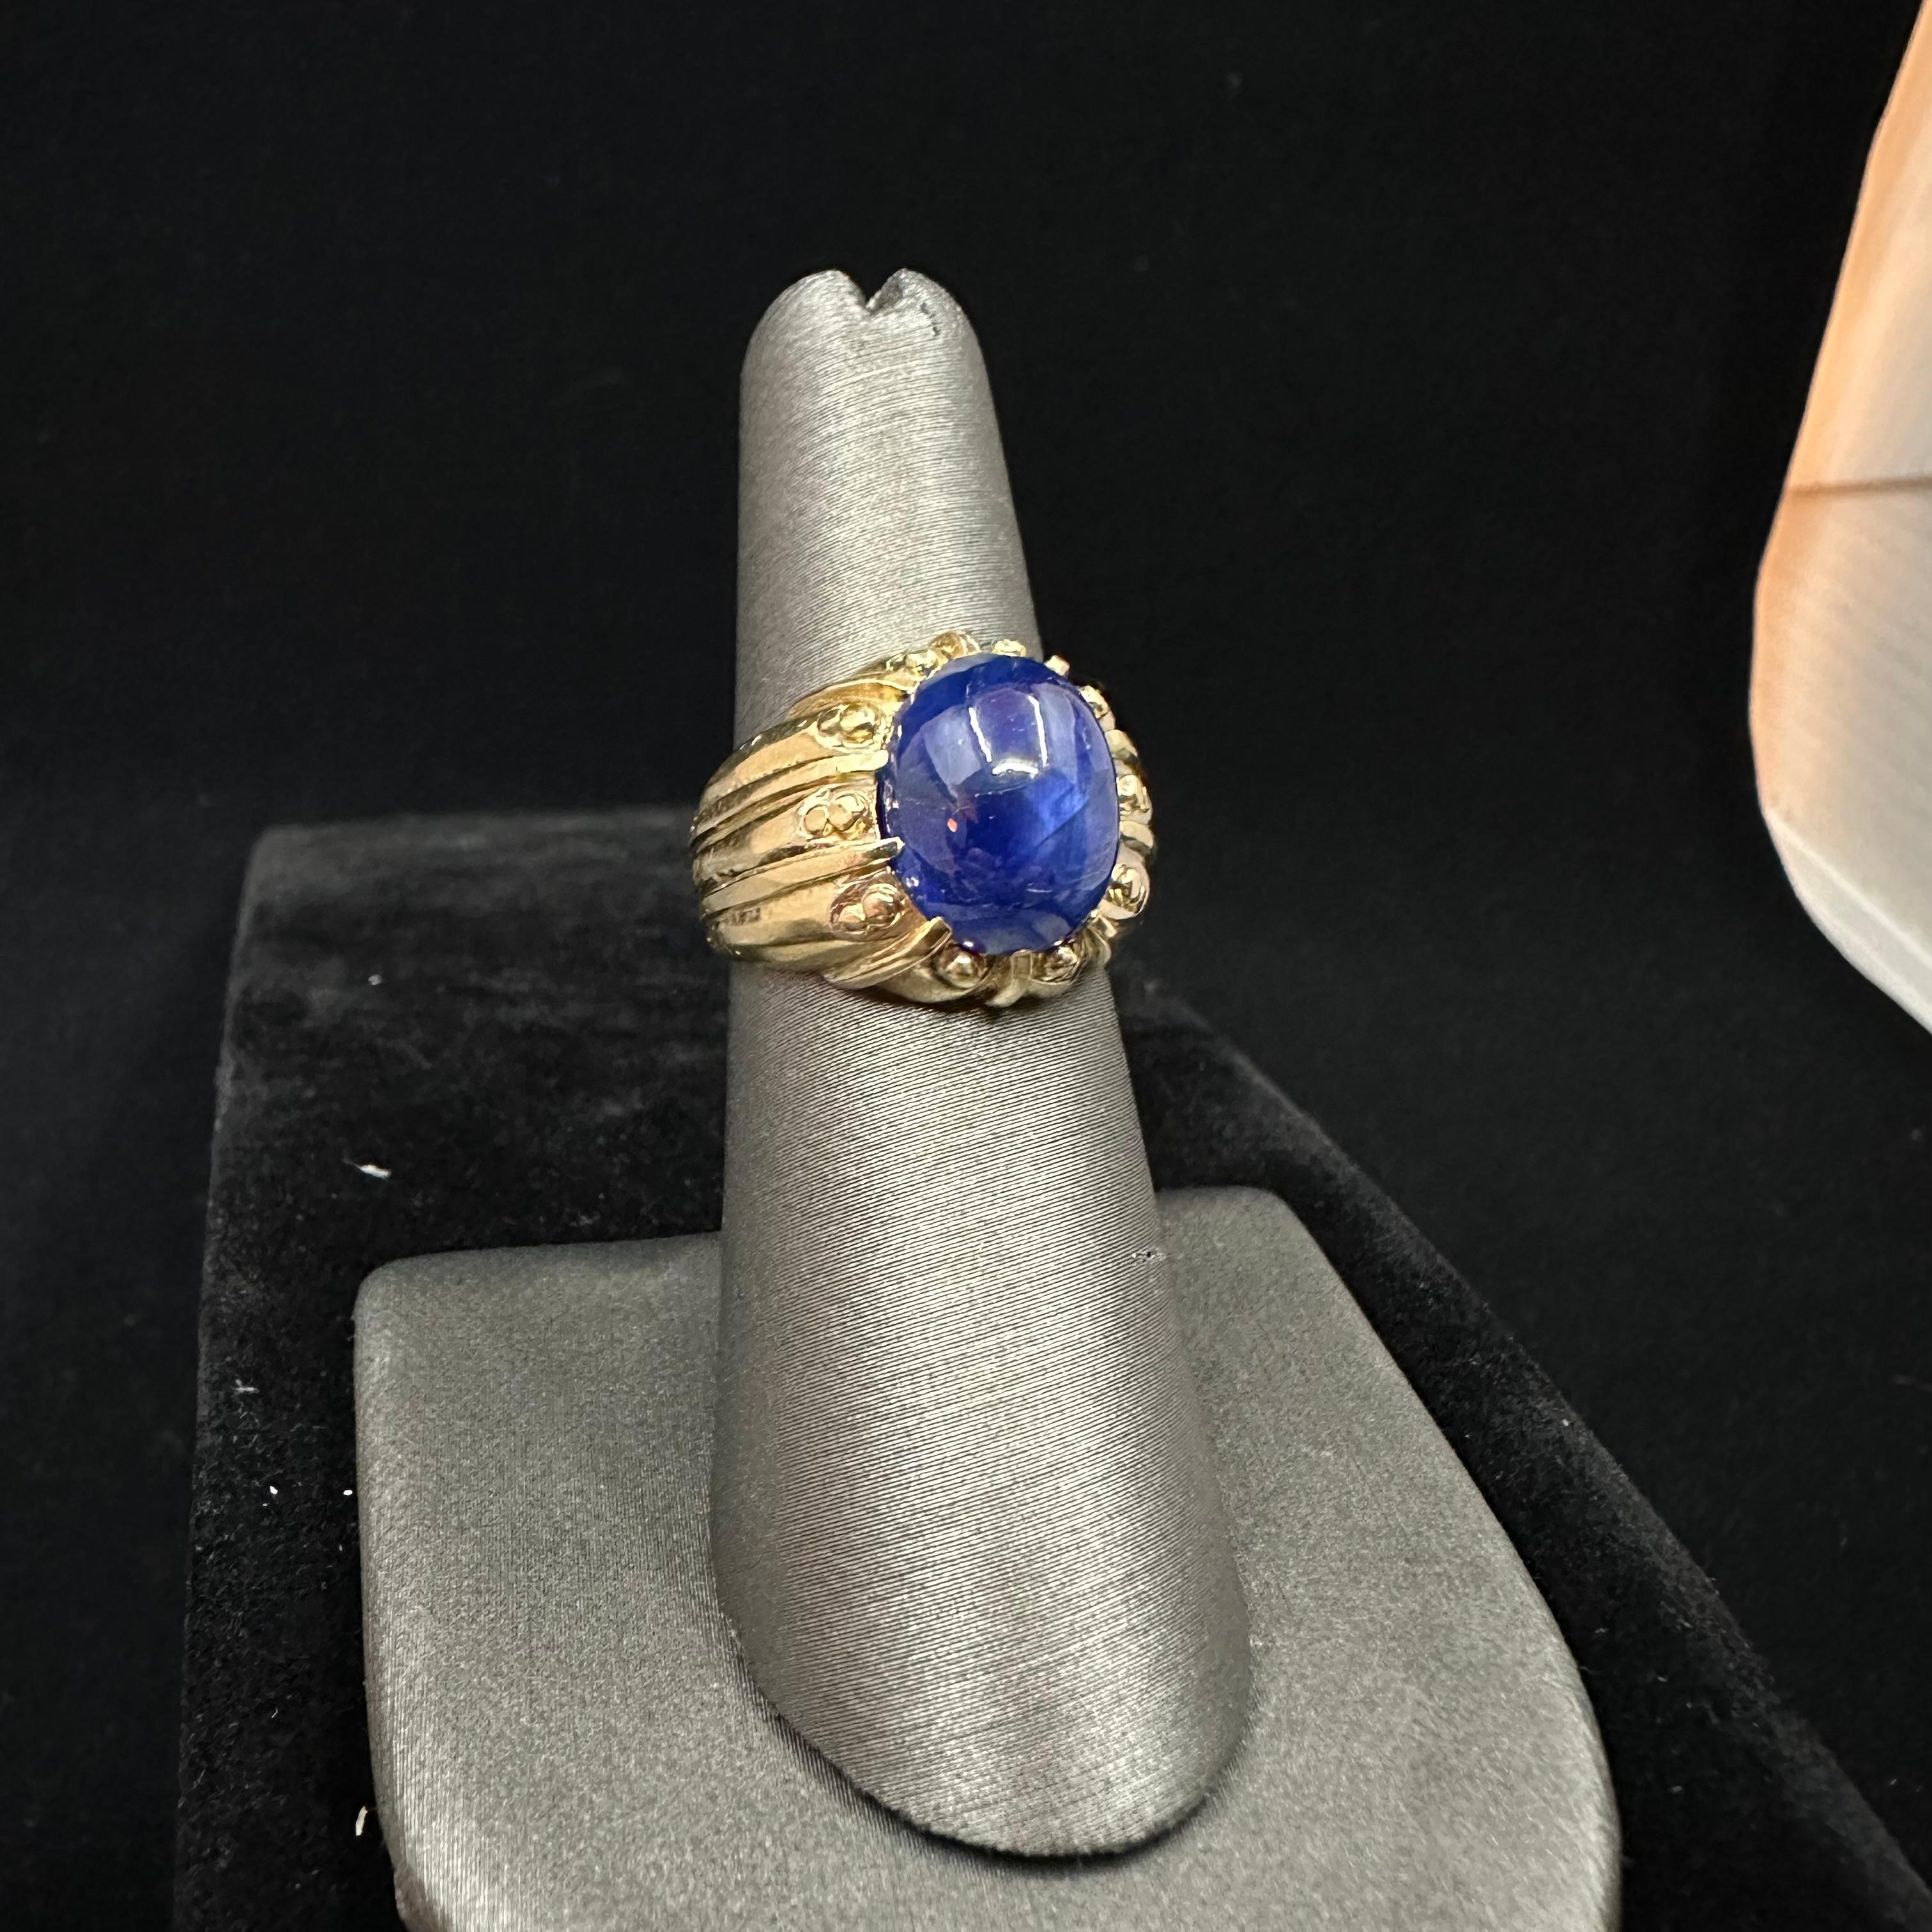 VCA Italy Cabochon blue sapphire, 7.32 ct Ring
Gia Report: Burma No Indictions of Heating
Size 5.25
Measurements: 12.35 x 9.75 x 5.94 mm
Pleasant Burmese color sapphire
Clarity: visible inclusions to the naked eye, this ring boast a wonderful color